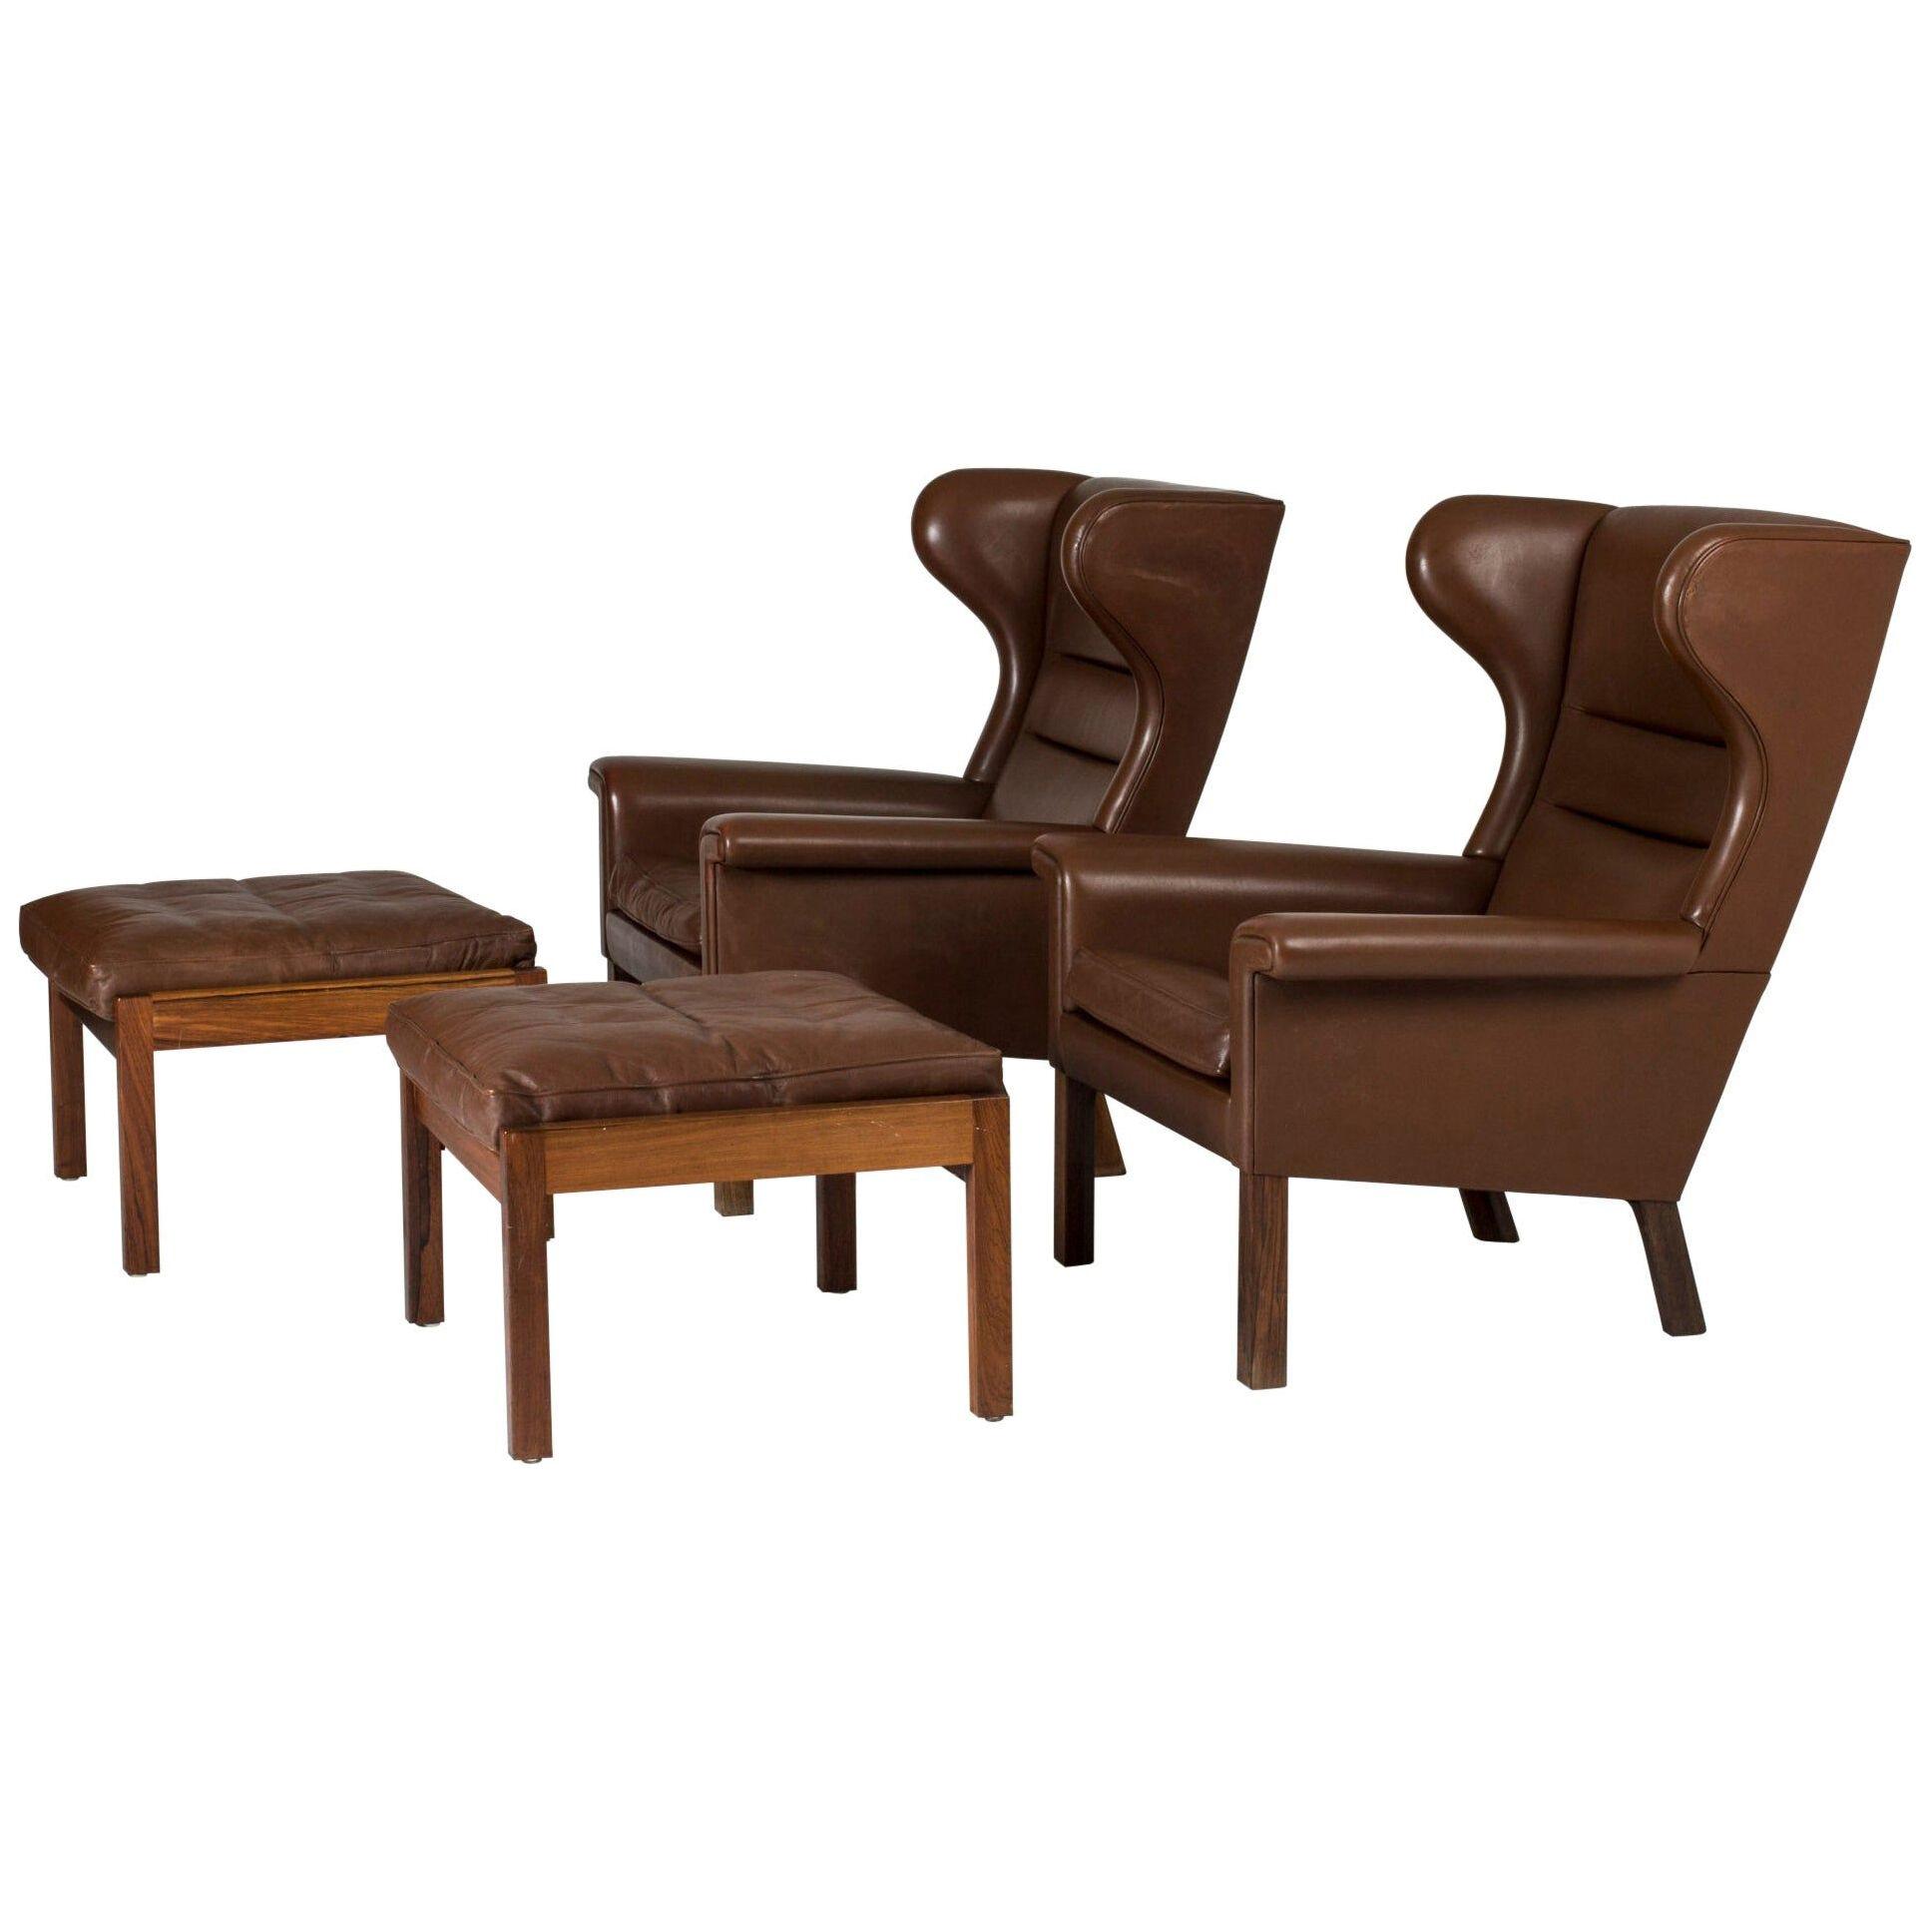 Pair of Leather Lounge Chairs by Hans J. Wegner for AP Stolen